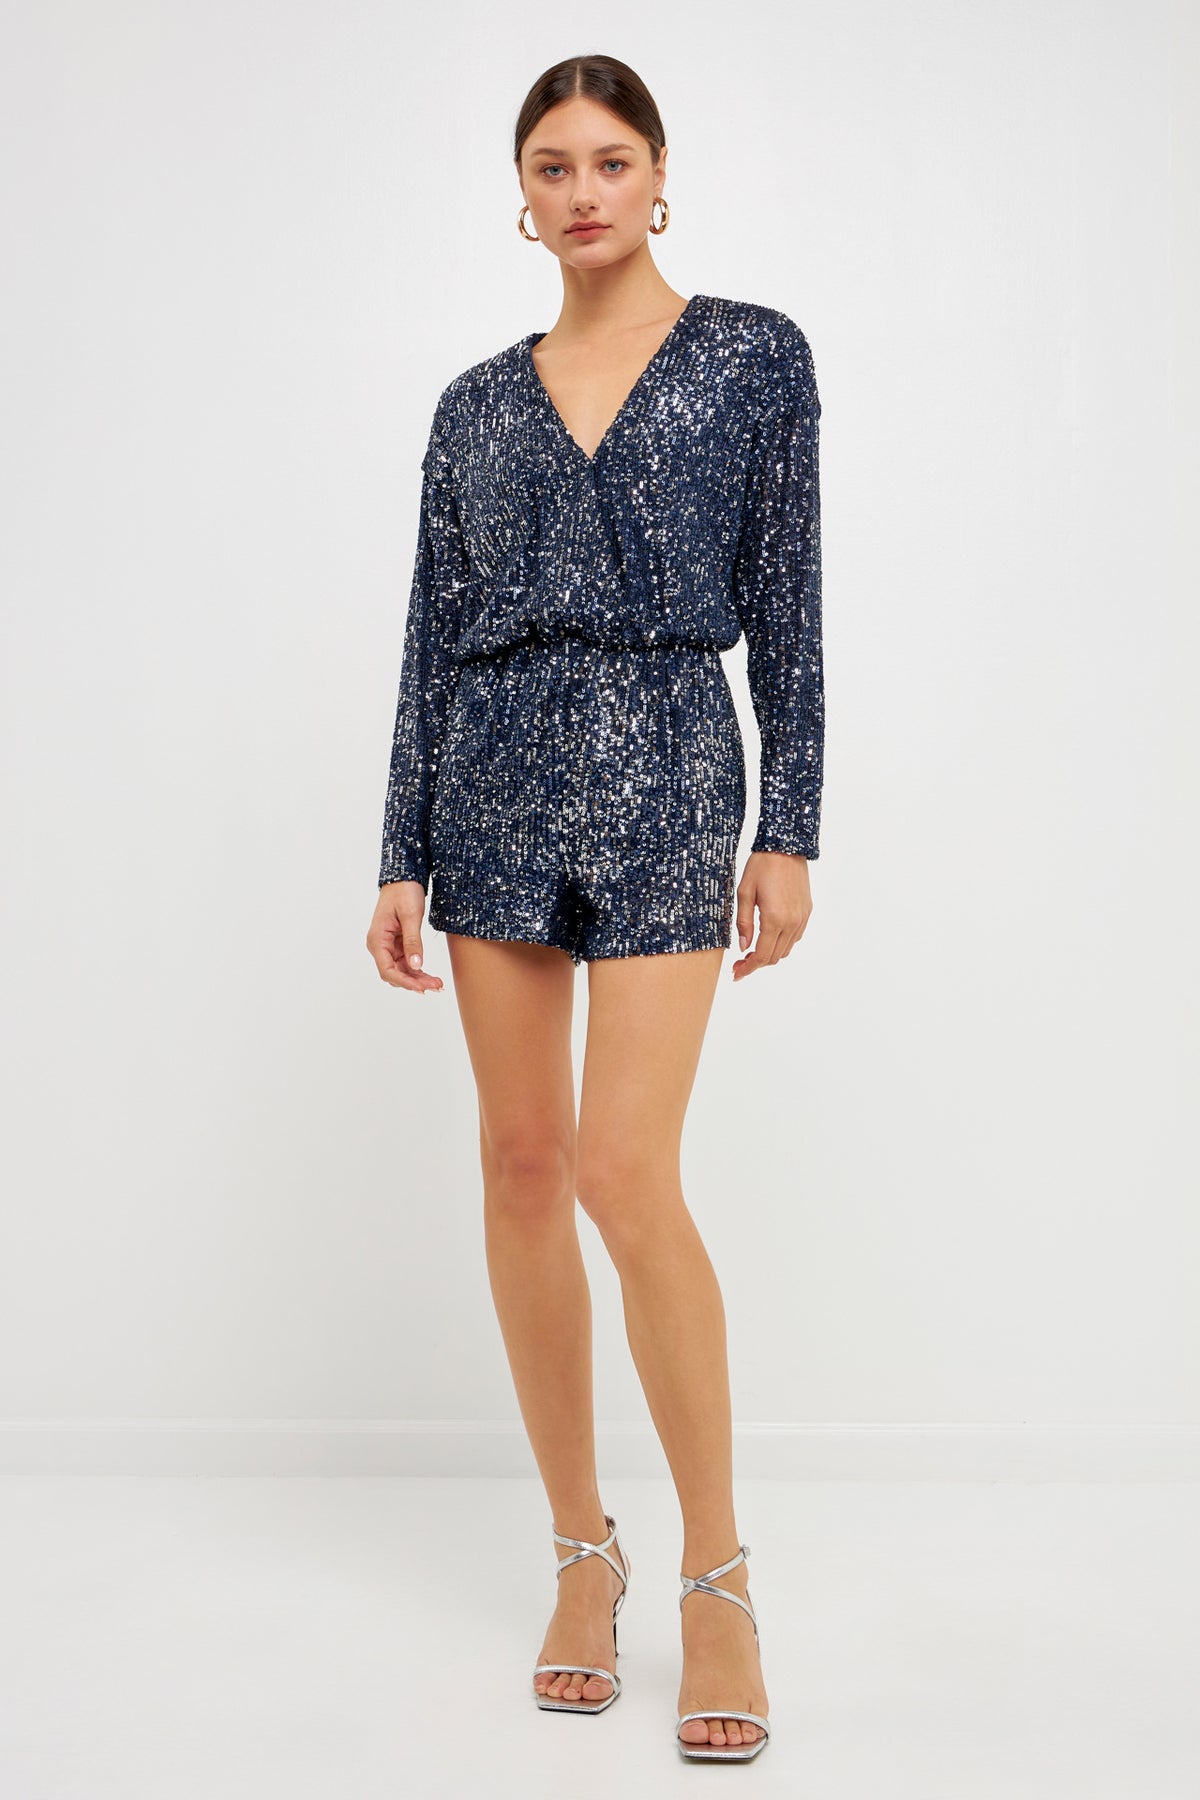 ENDLESS ROSE - Long Sleeve Sequin Romper - ROMPERS available at Objectrare